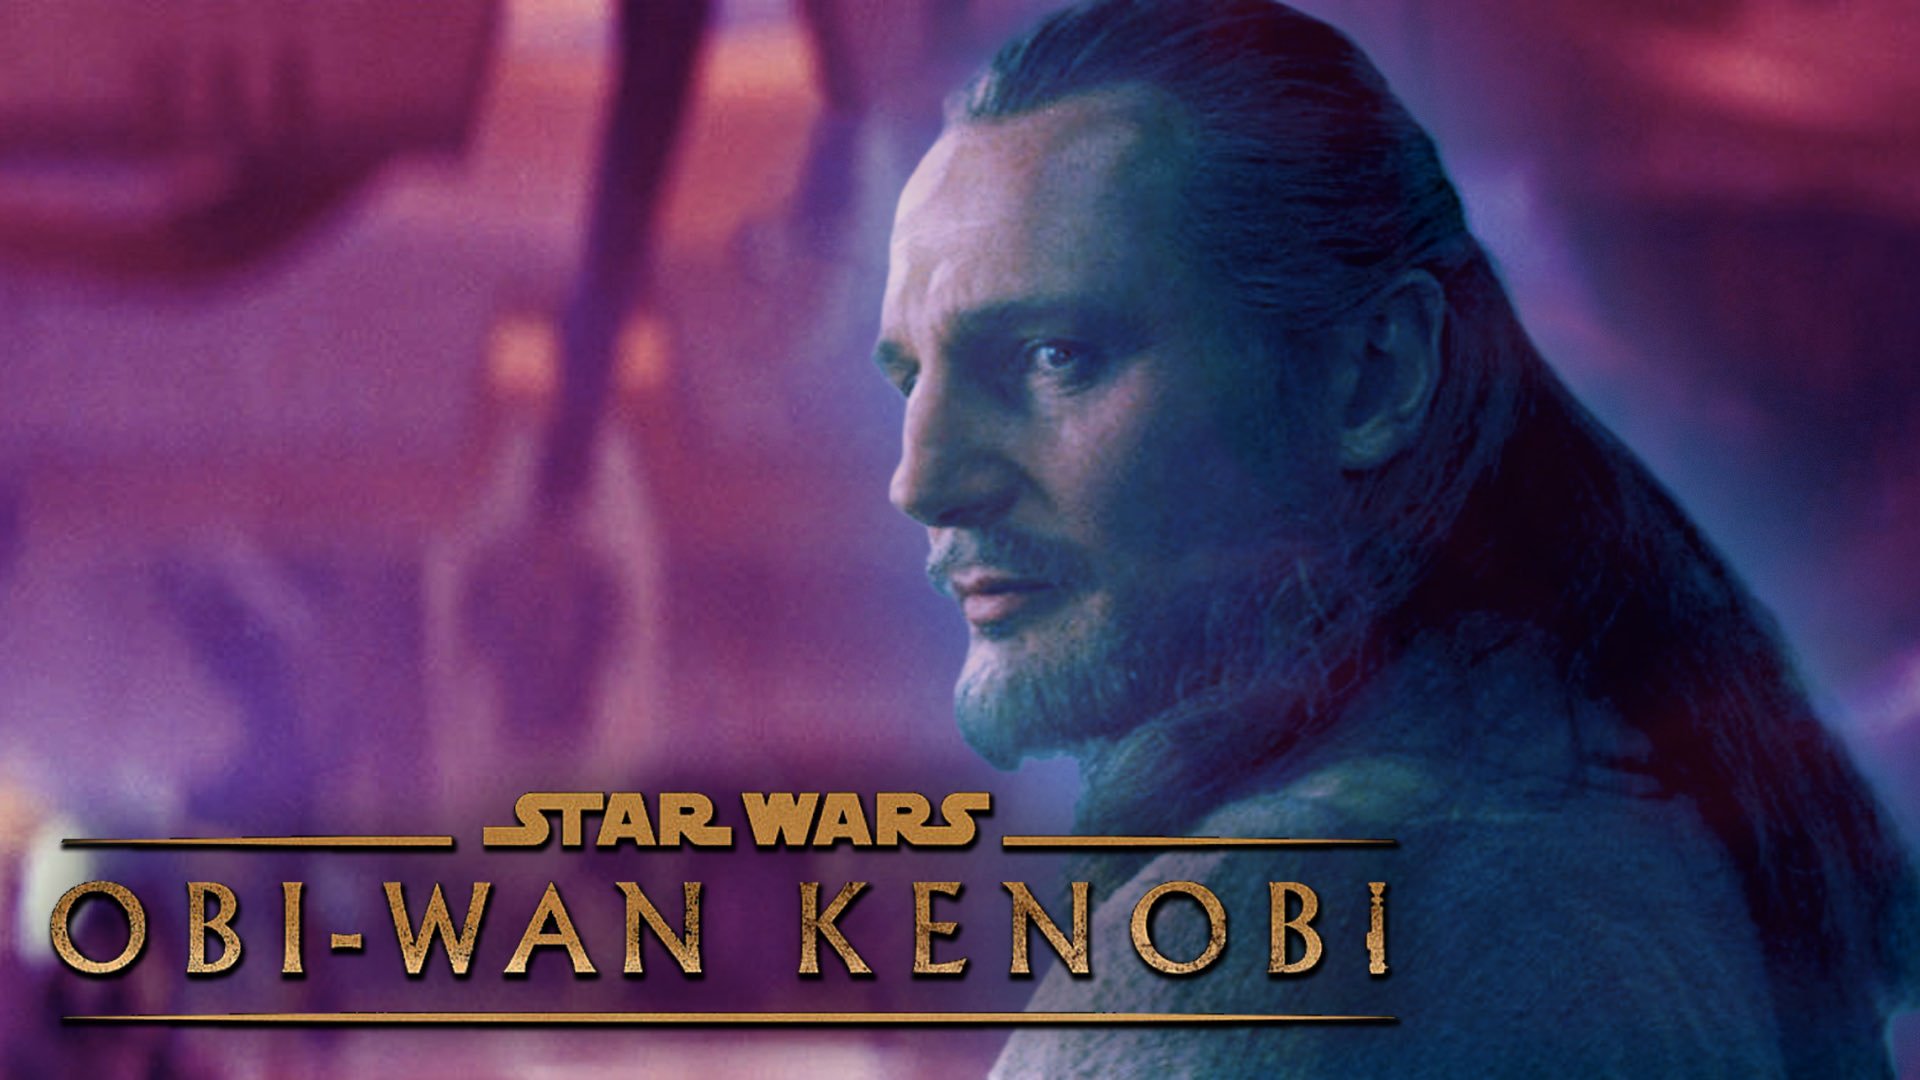 The Resistance Broadcast Qui Gon Jinn Appearing In 'Obi Wan Kenobi' The Most Expected Surprise Ever? Wars News Net